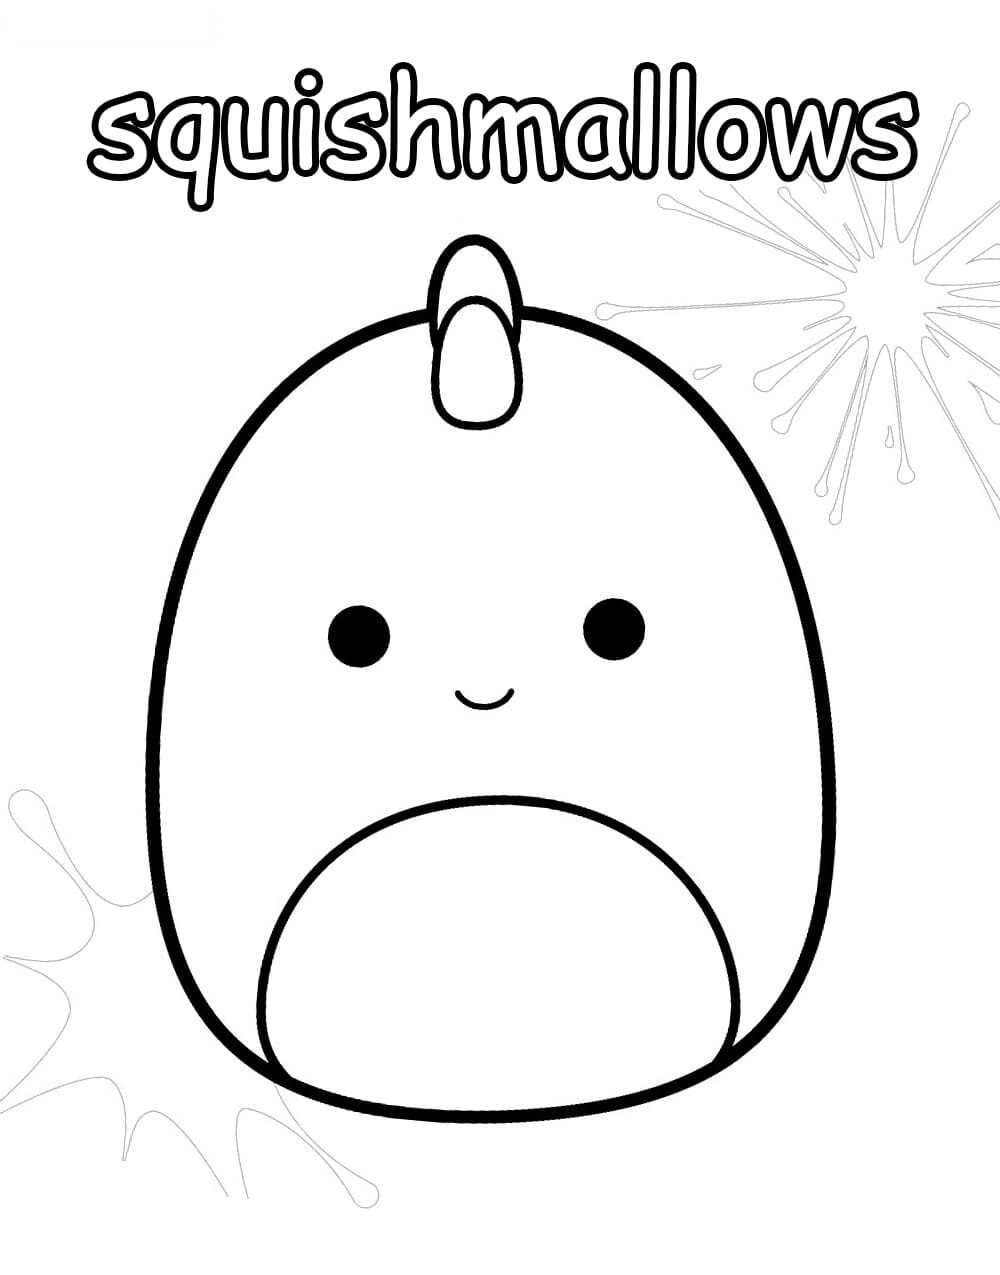 Squishmallows Coloring Pages Printable / Coloring Pages For Girls Super